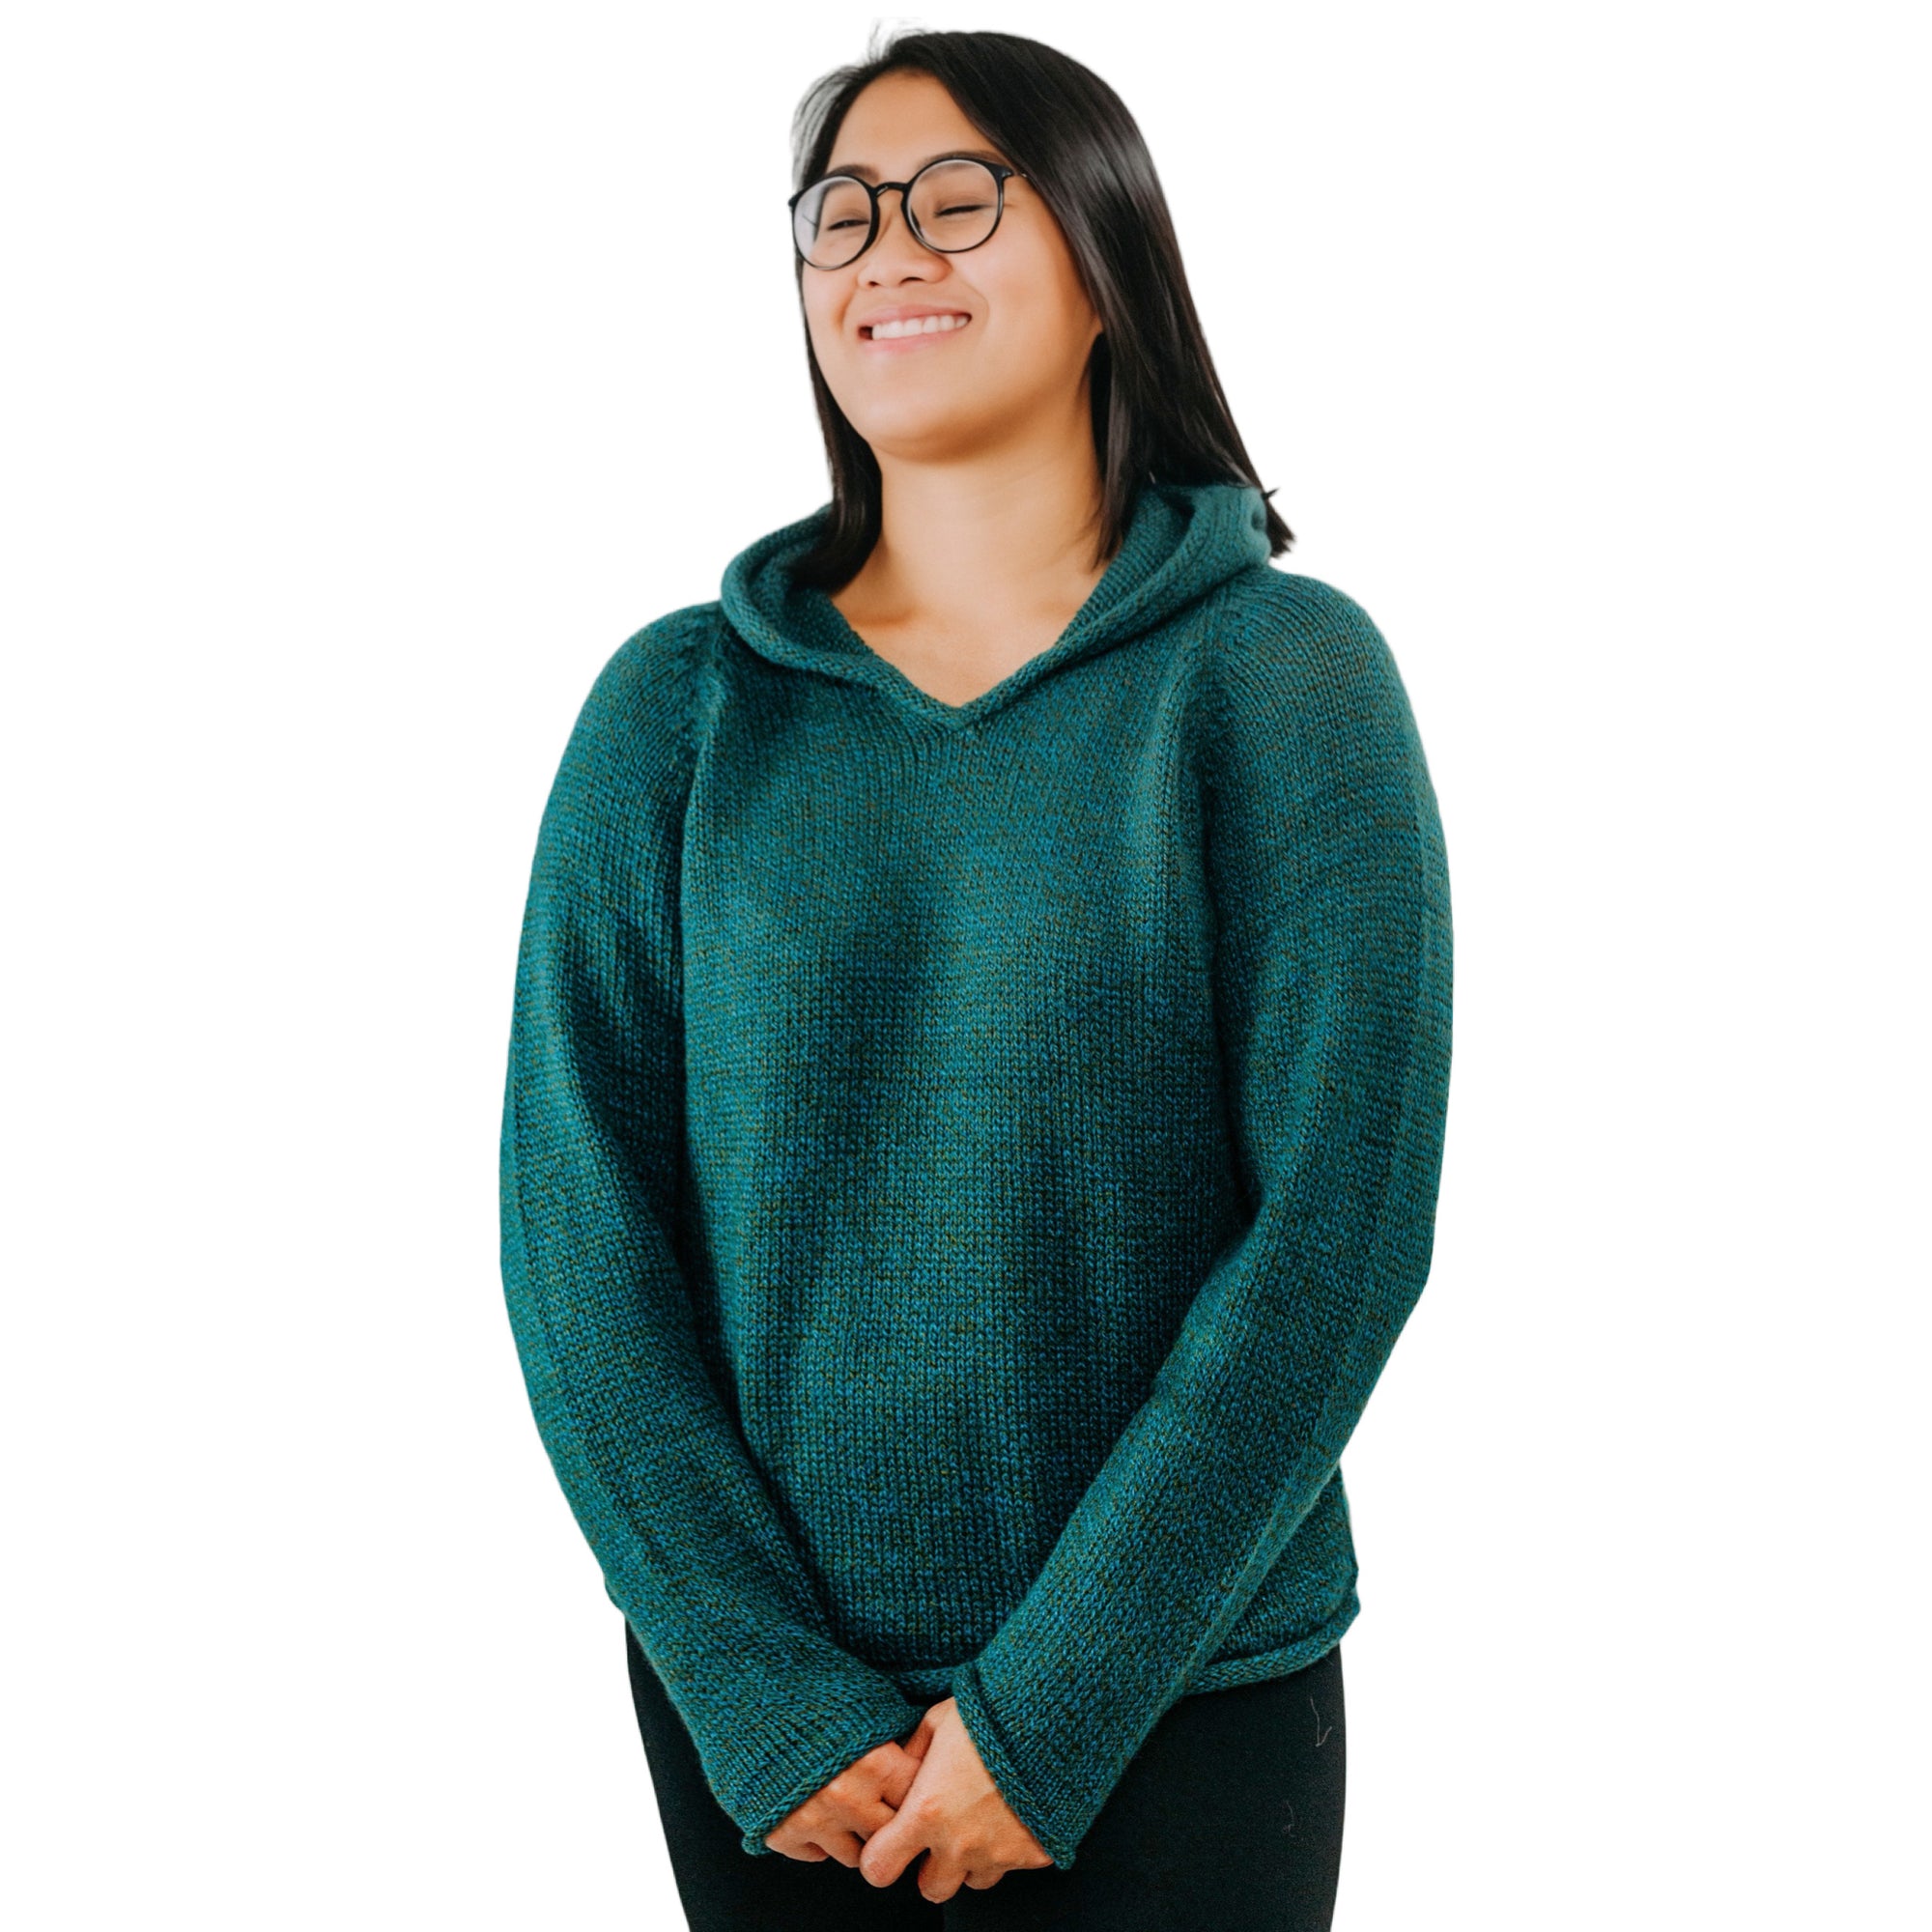 Knit Alpaca Hooded Pullover Sweater